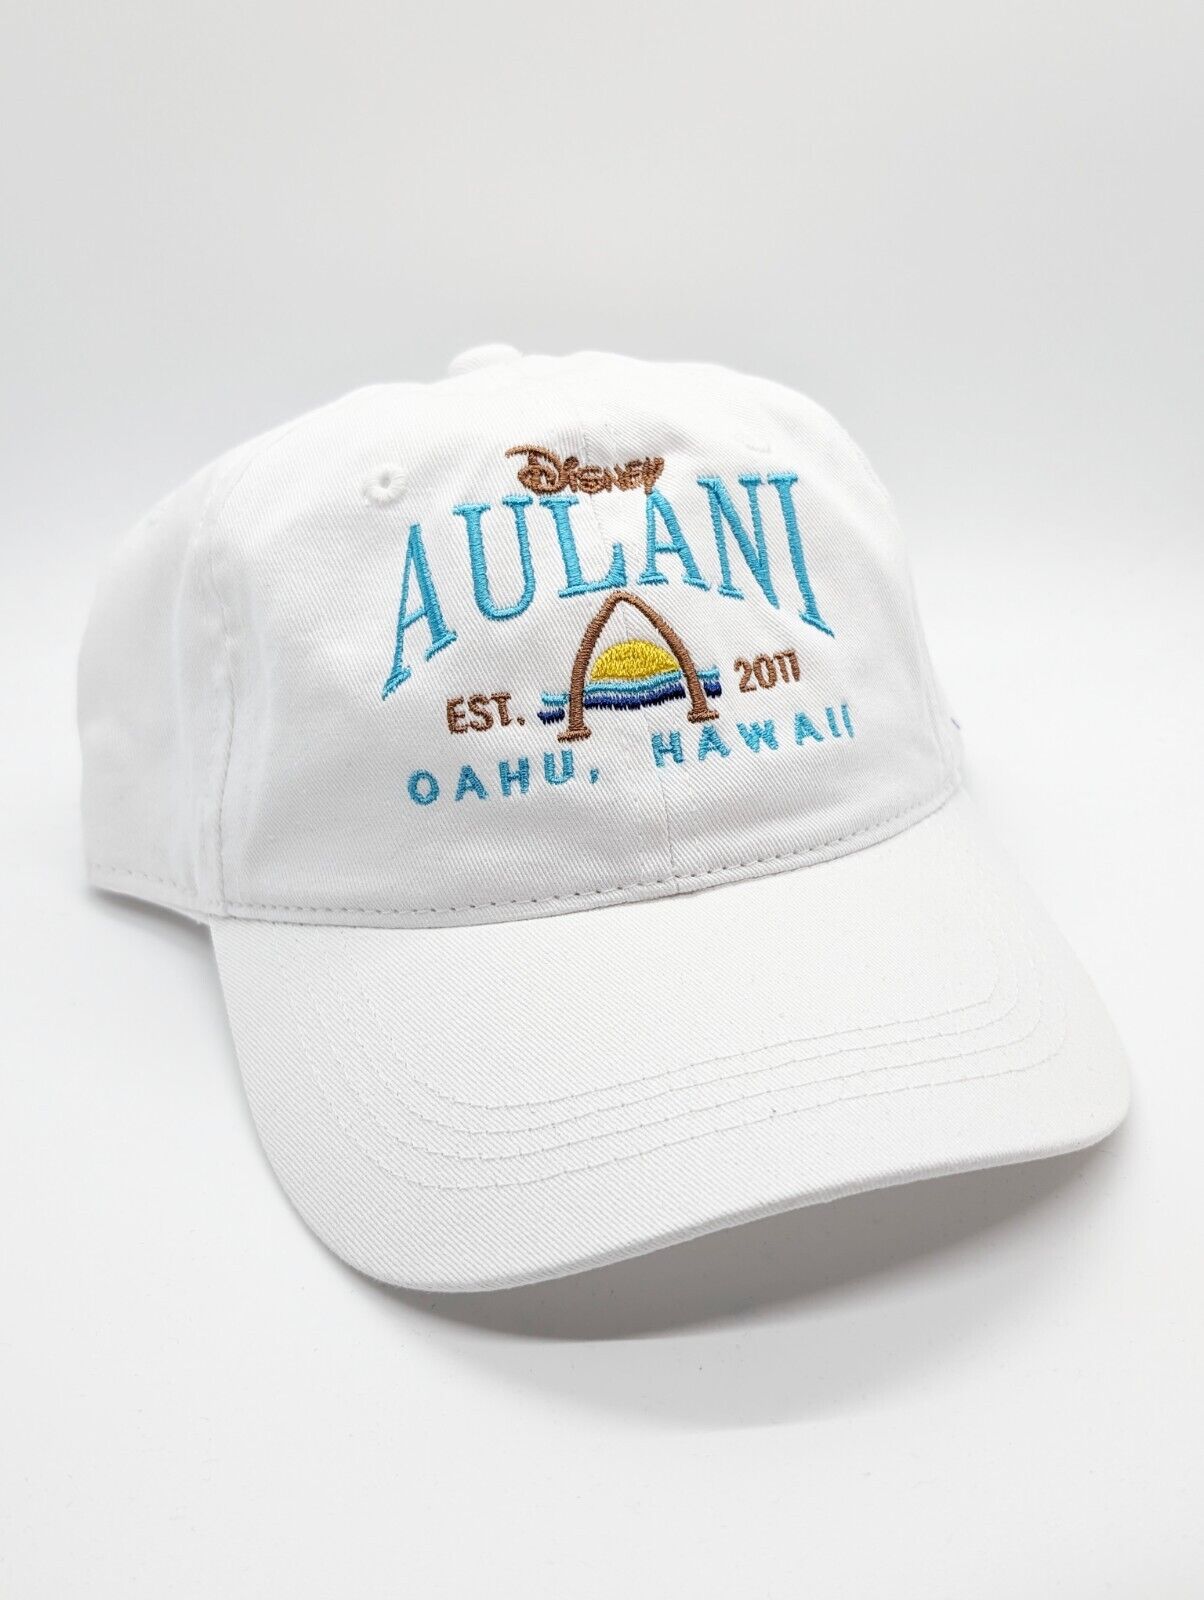 Disney Vacation Club DVC Aulani Inspired  Embroidered Hat